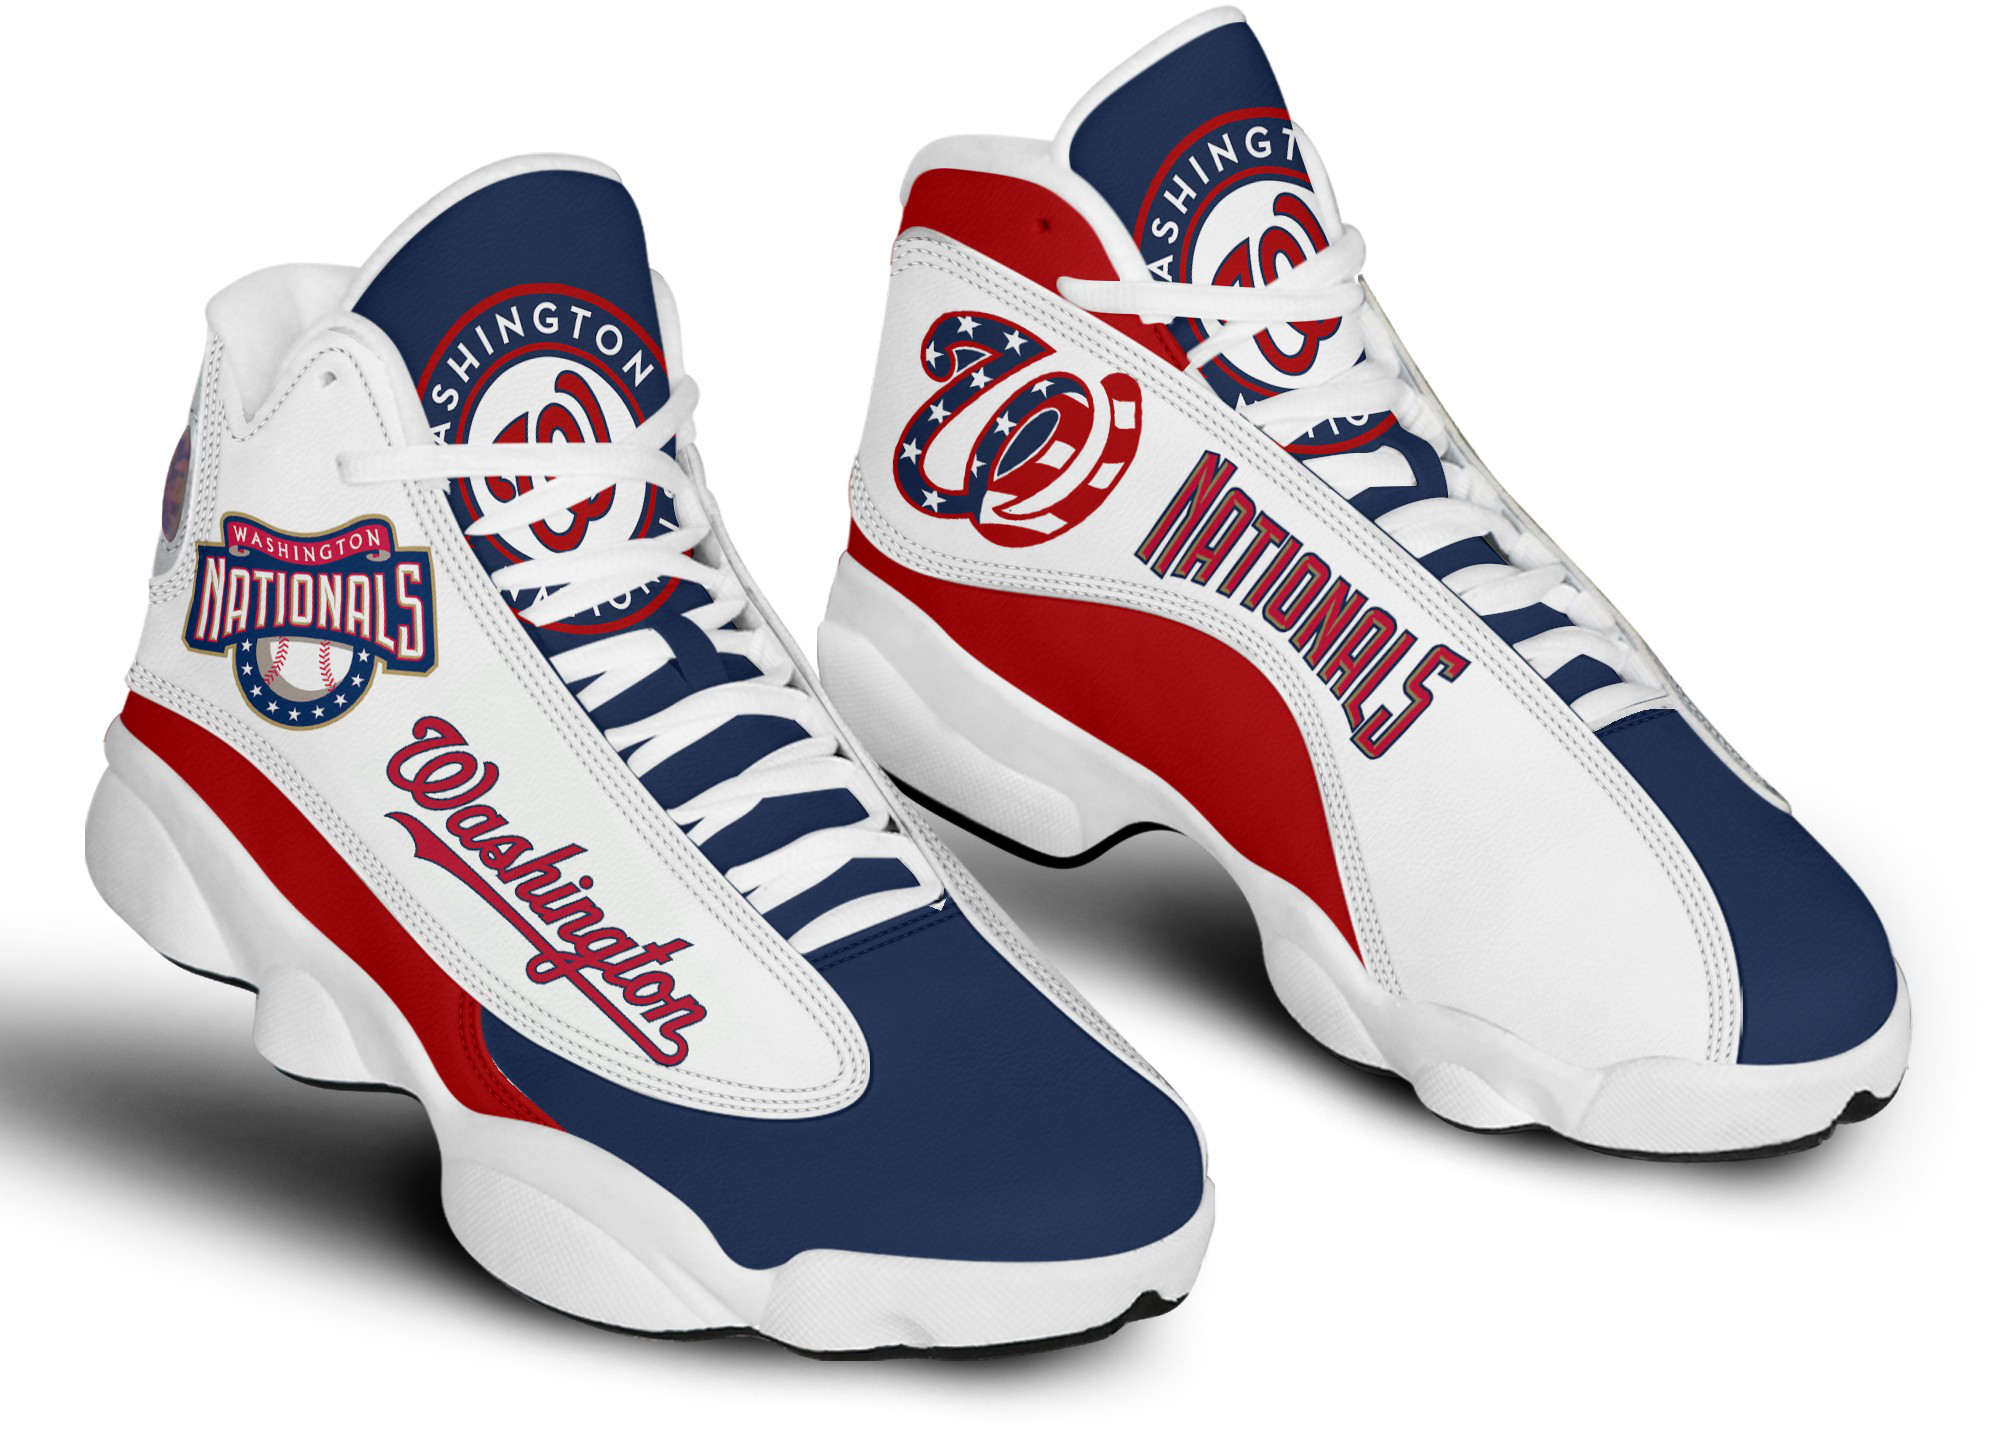 Women's Washington Nationals Limited Edition AJ13 Sneakers 001